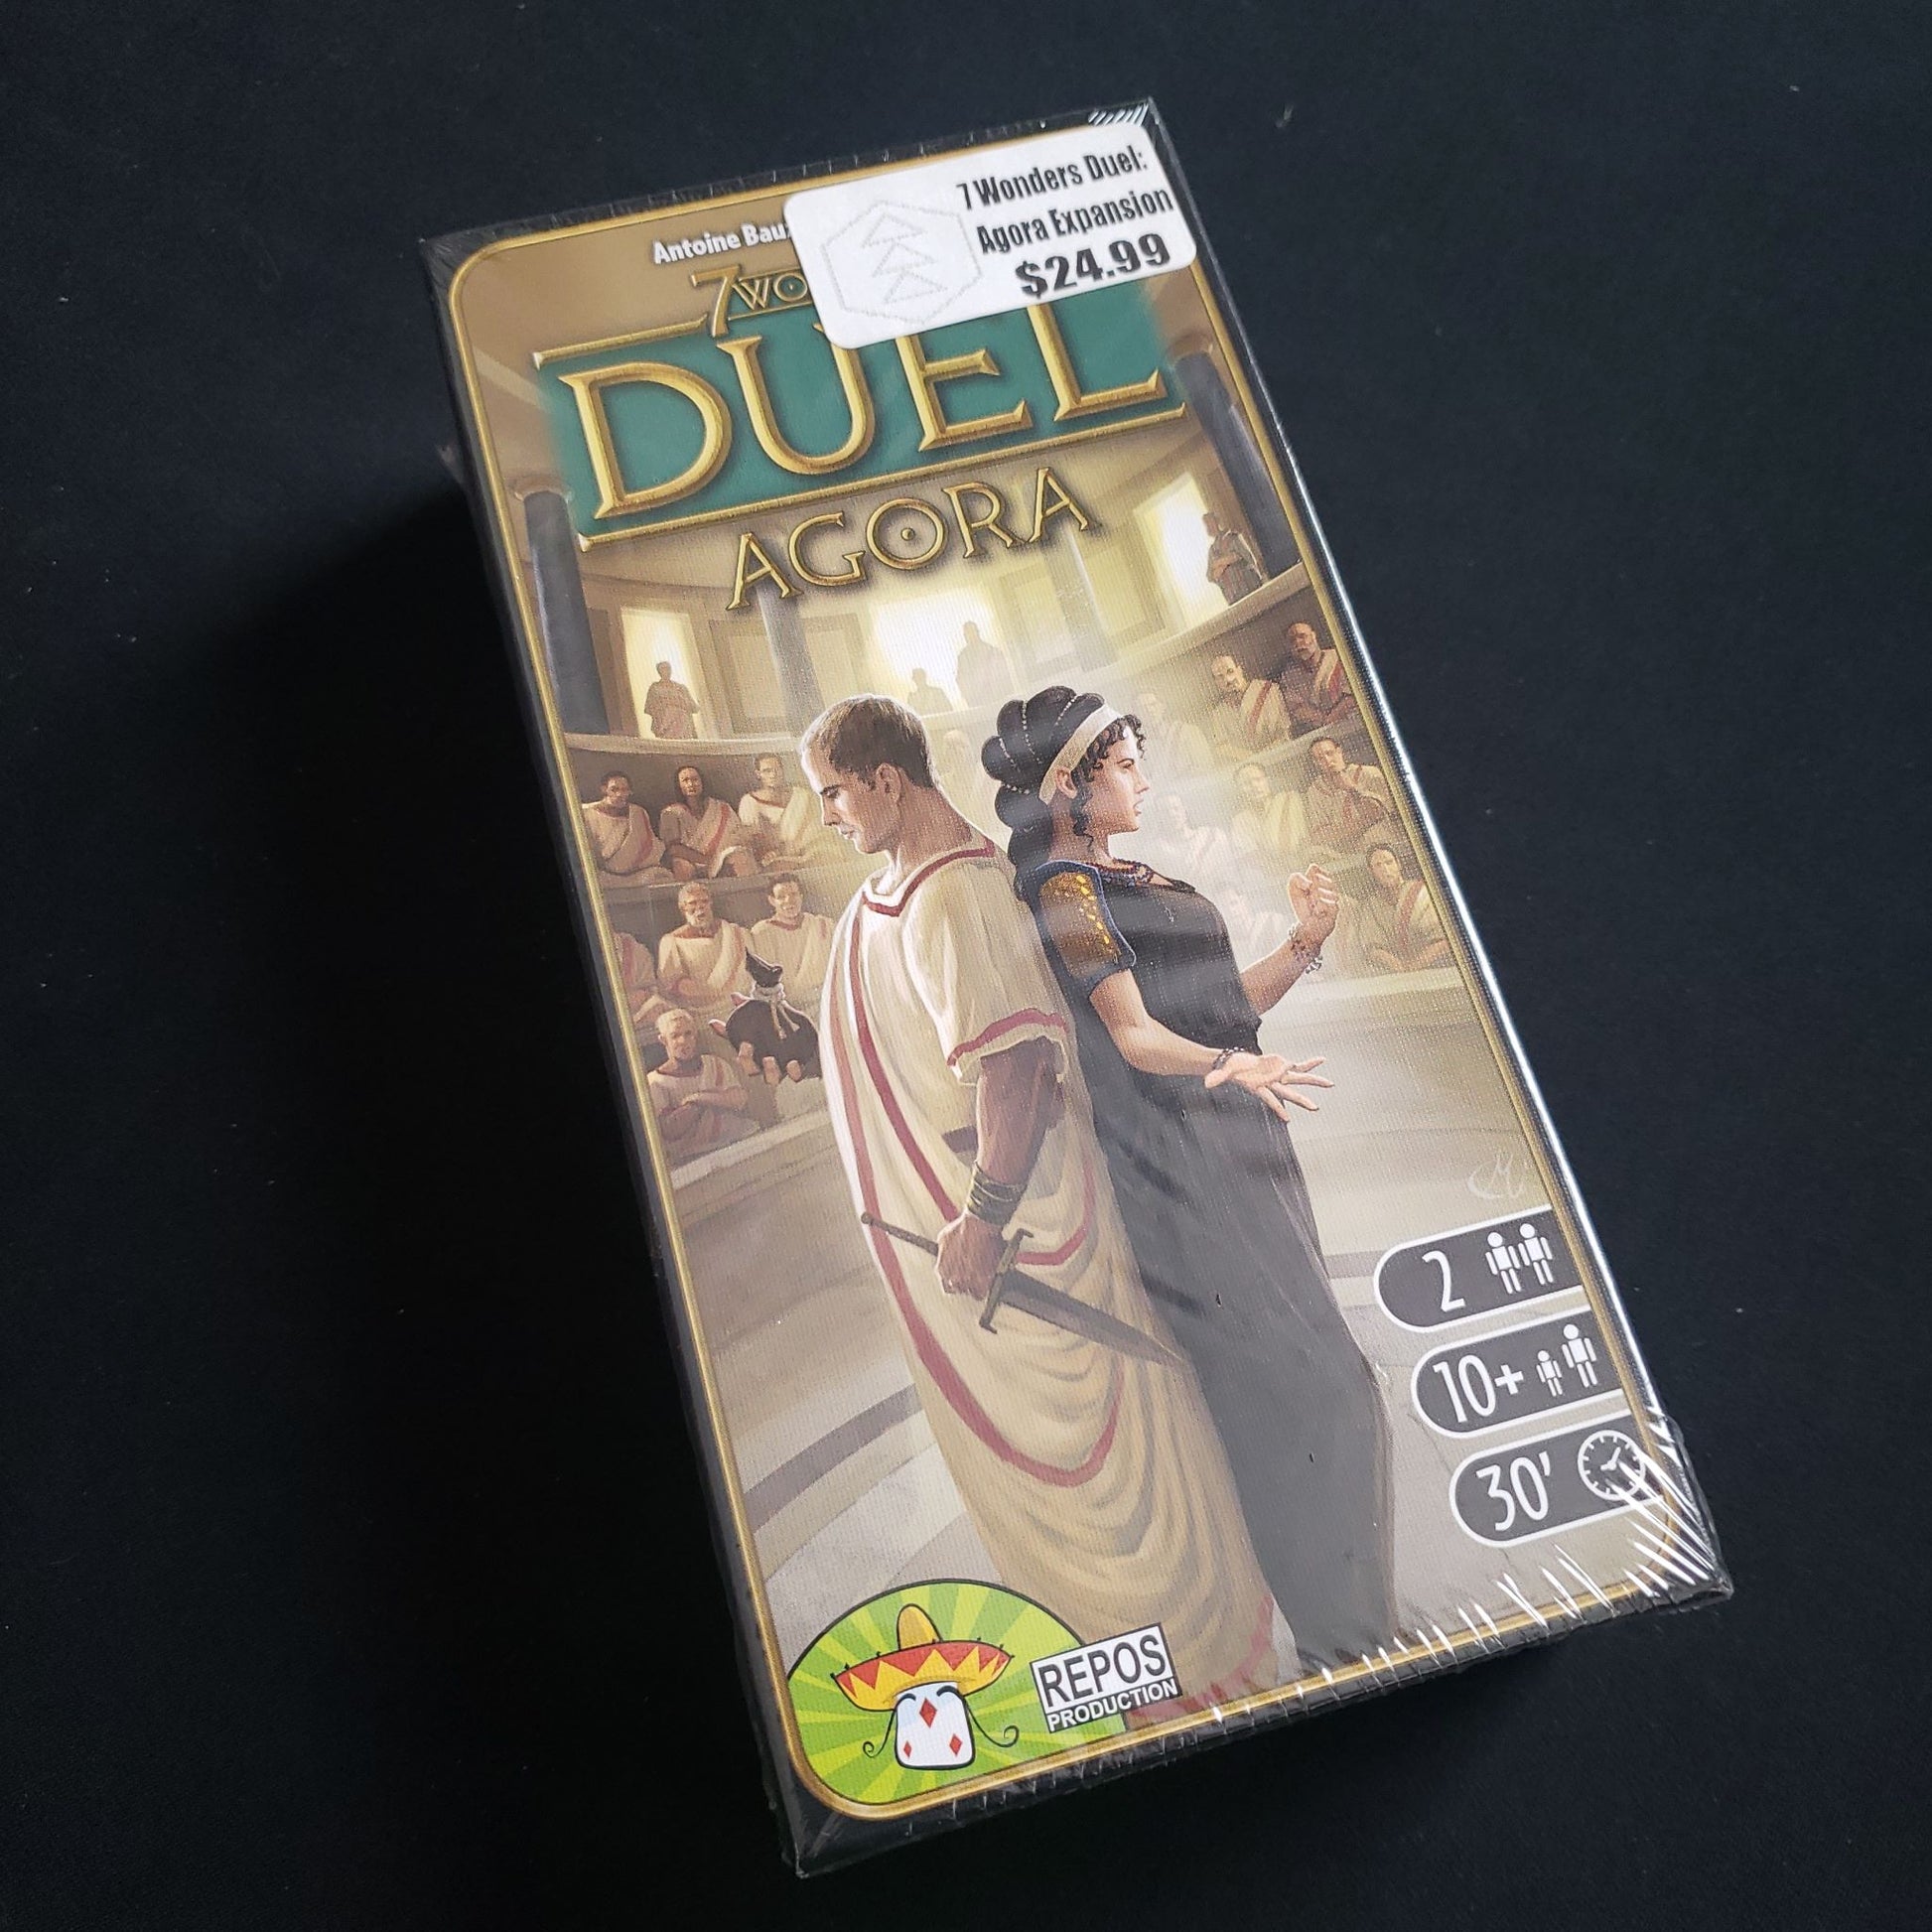 7 Wonders Duel board game: Agora expansion - front cover of box